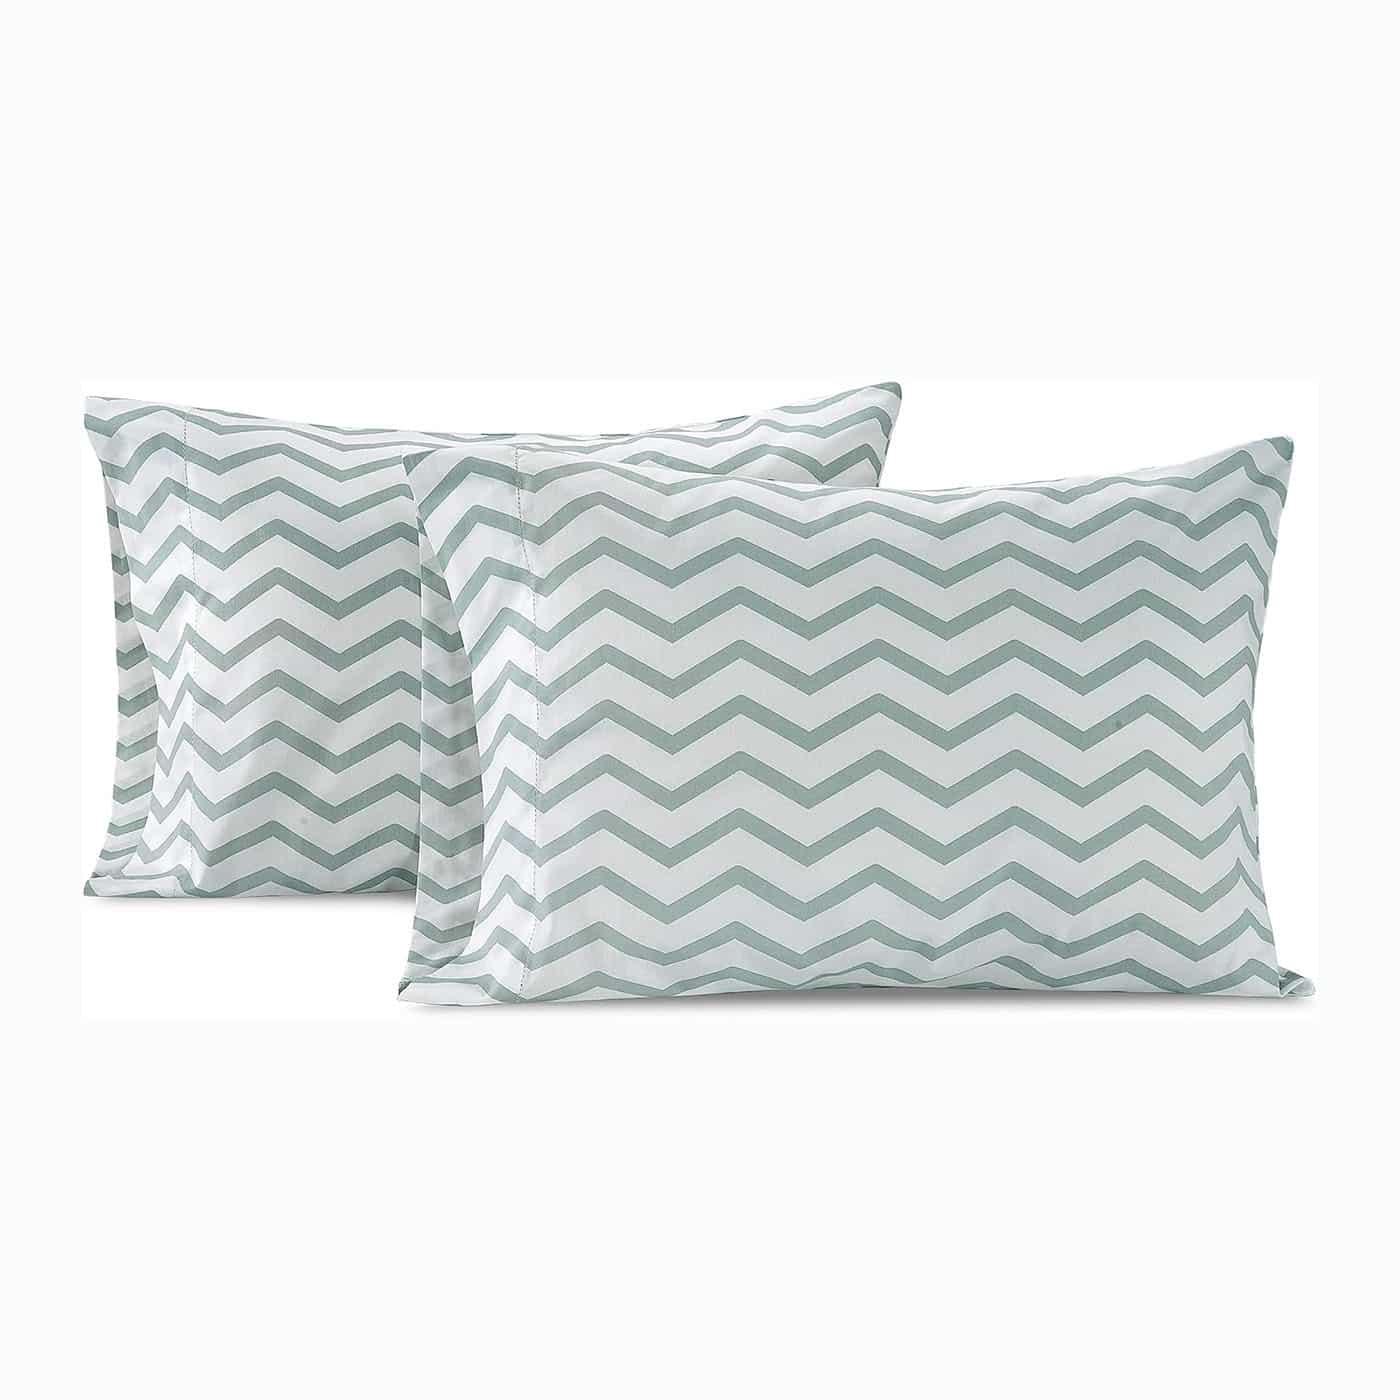 King Organic Cotton Pillow Cases (in a funky print so we don't accidentally leave them behind)